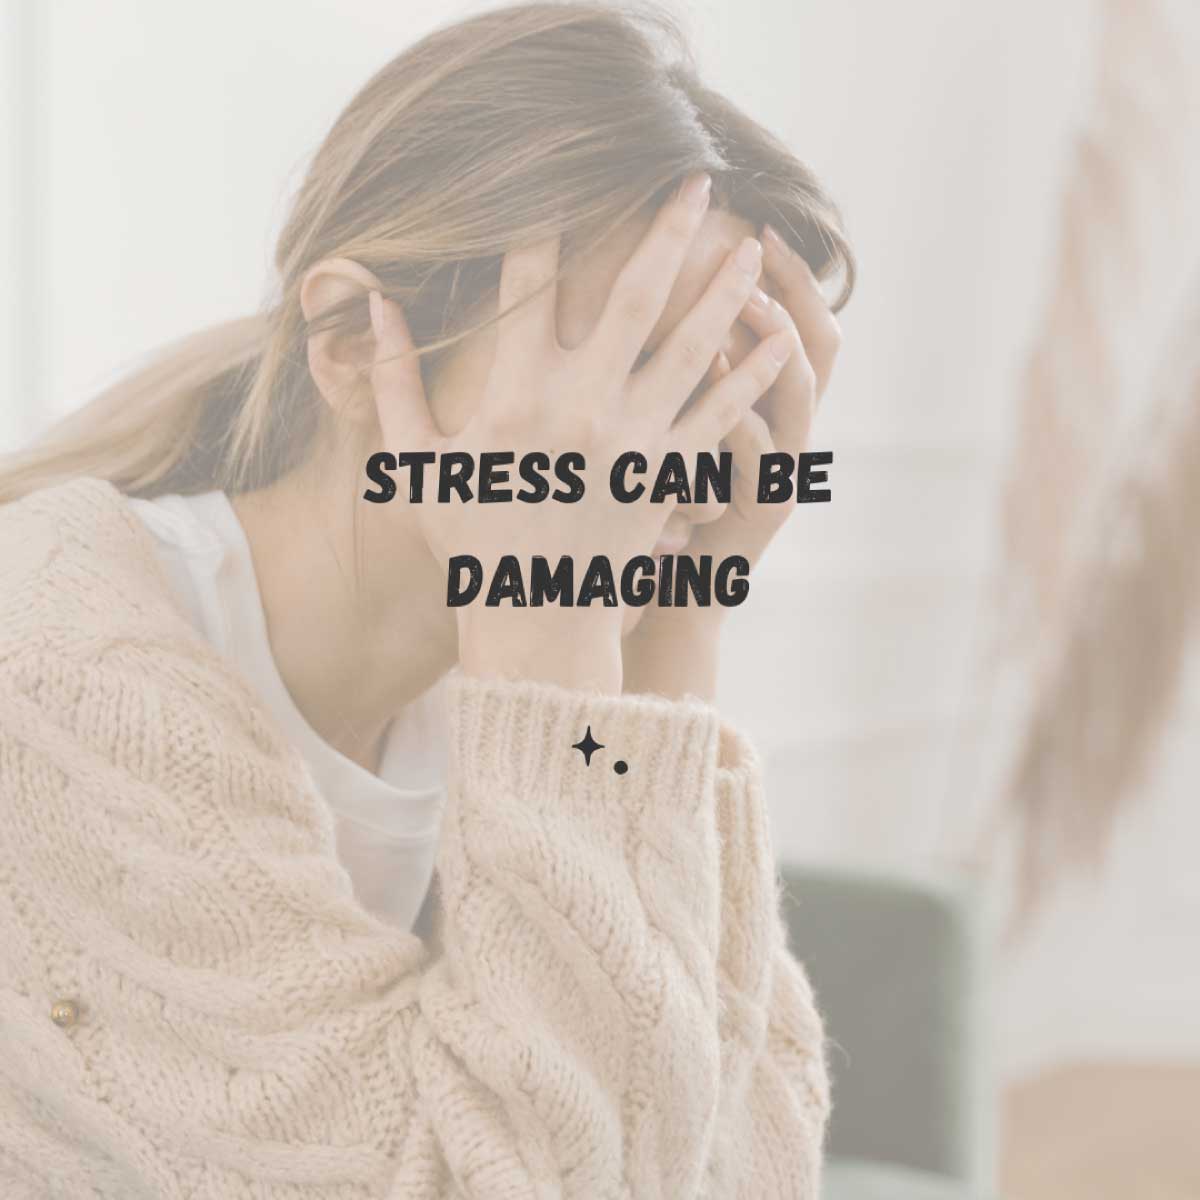 stress can be damaging - a woman sitting with her head in her hands and appears to be stressed out.